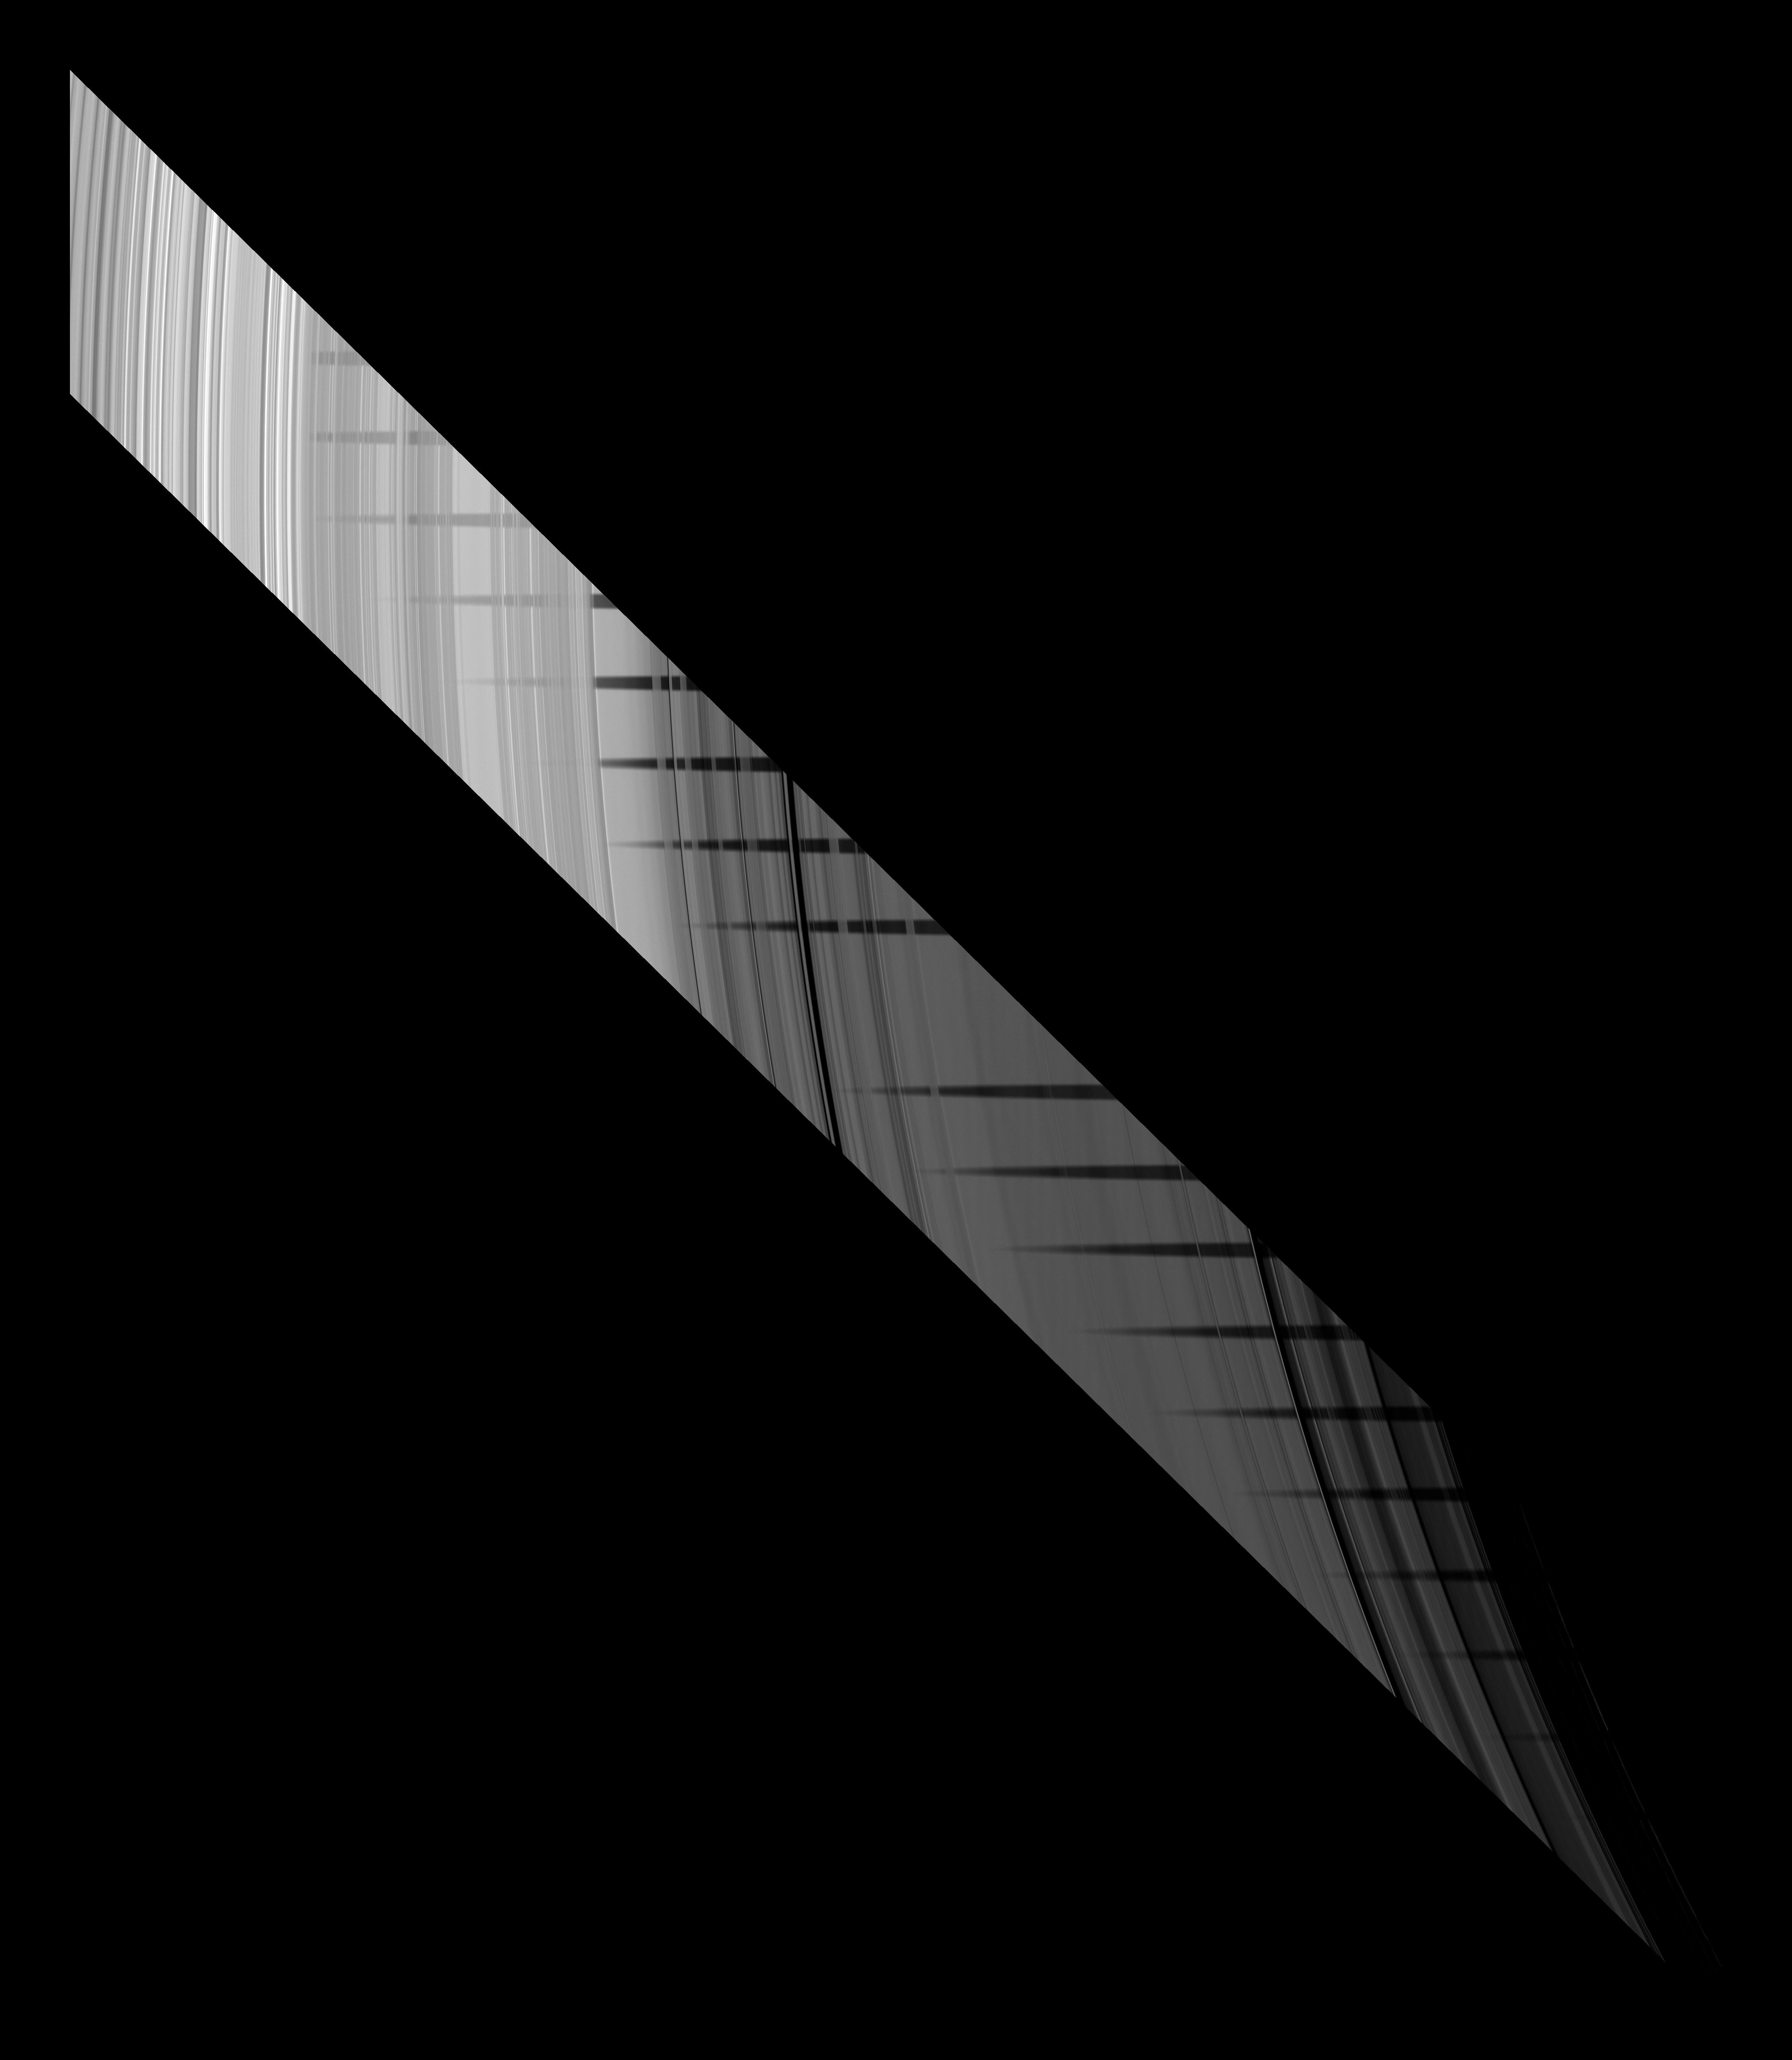 Part of the shadow of Saturn's moon Mimas appears as if it has been woven through the planet's rings in this unusual series of images from Cassini.